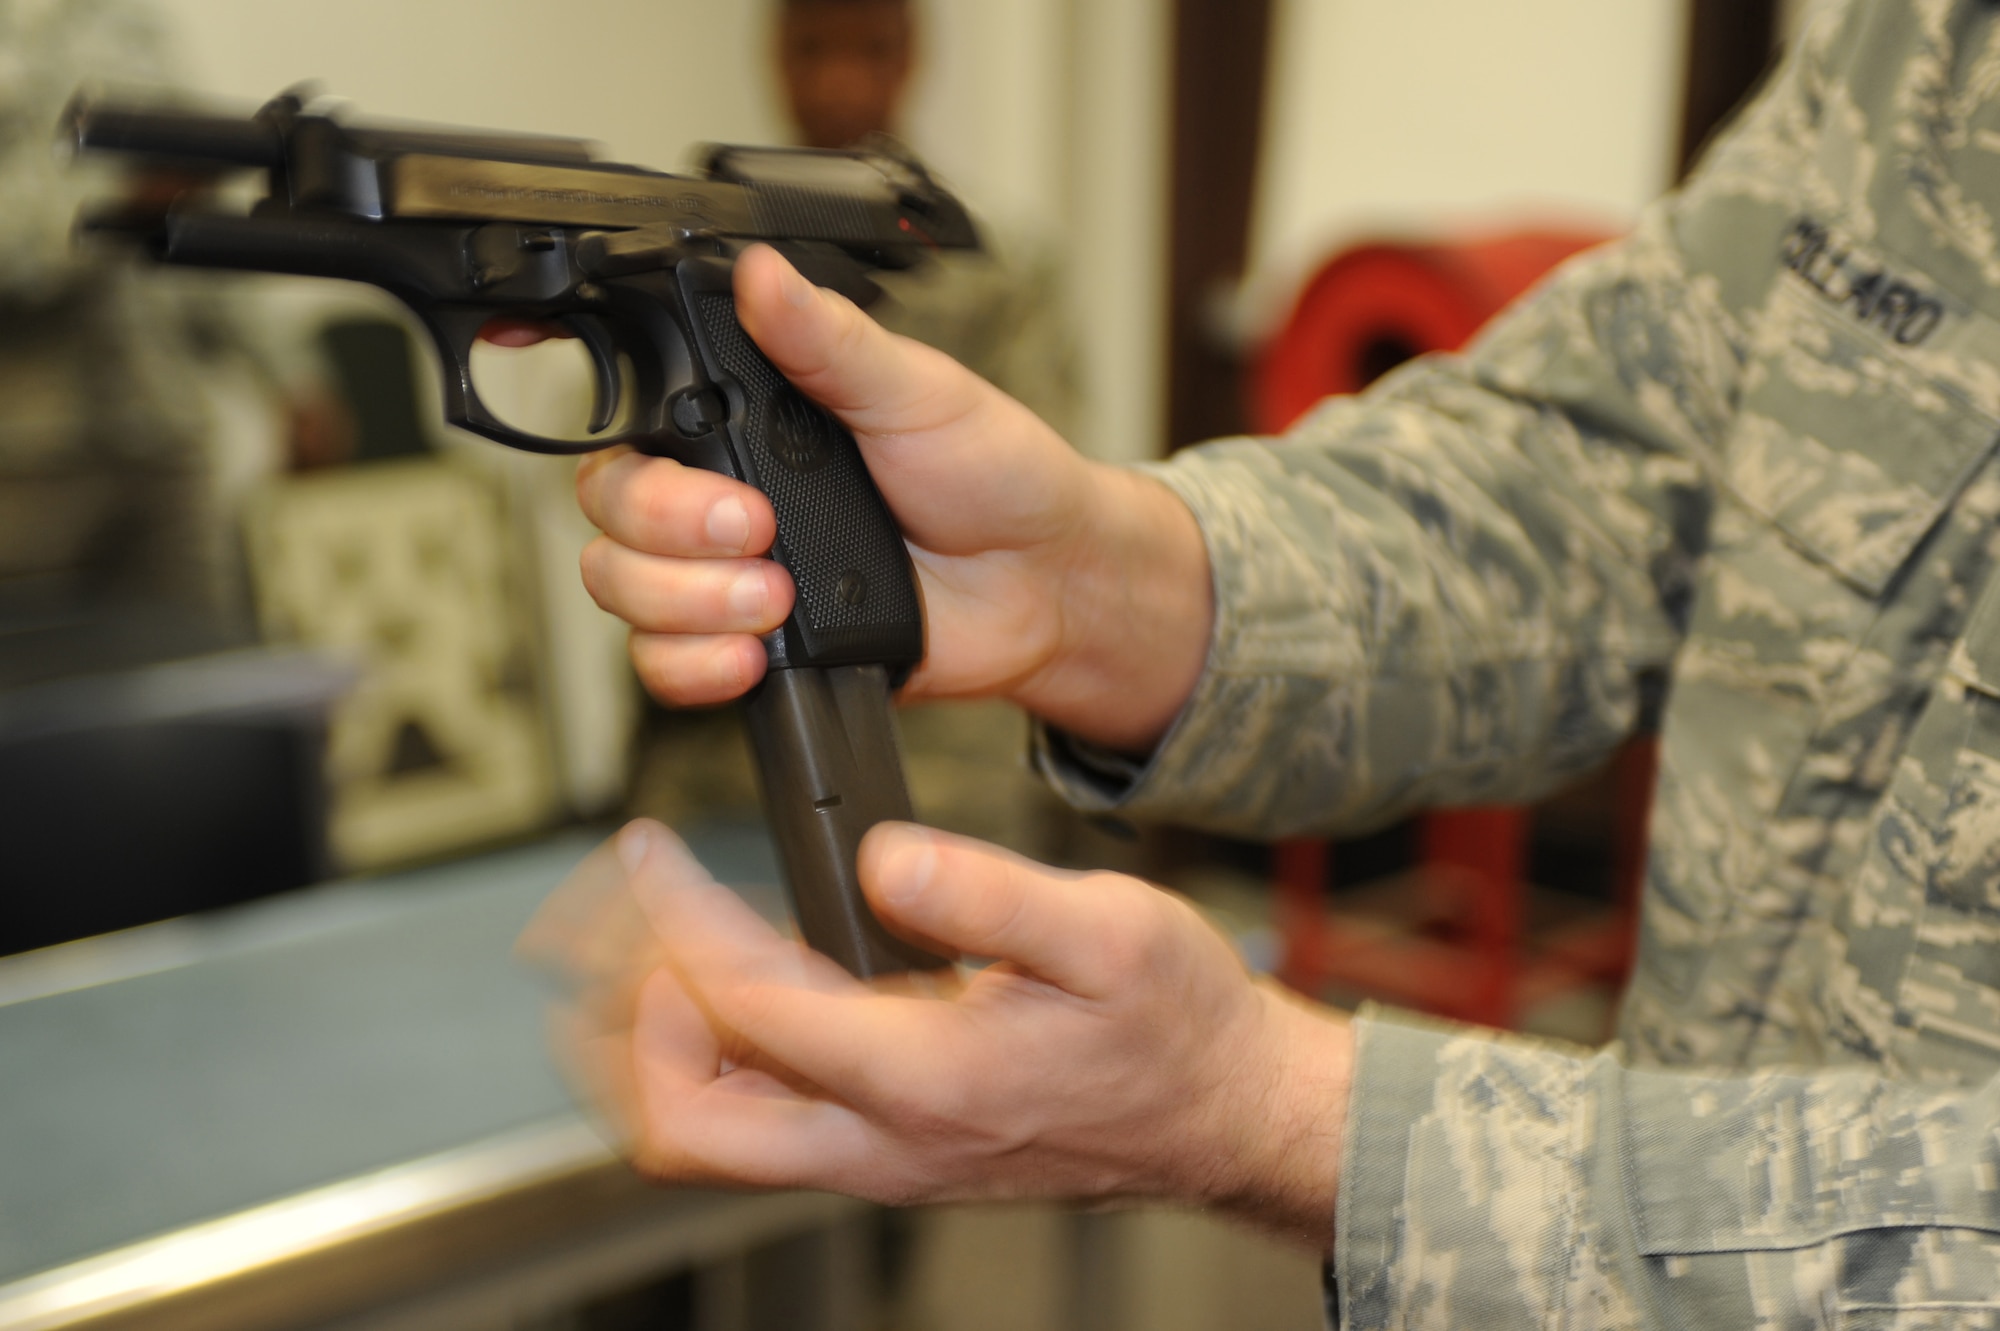 WHITEMAN AIR FORCE BASE, Mo. -  Senior Airman Robert Collaro, 509th Security Forces Squadron combat arms instructor, goes over the reload procedures for an M-9 at the Combat Arms Training and Maintenance facility here, March 16, 2010.(U.S. Air Force photo by Airman 1st Class Carlin Leslie )(Released)




